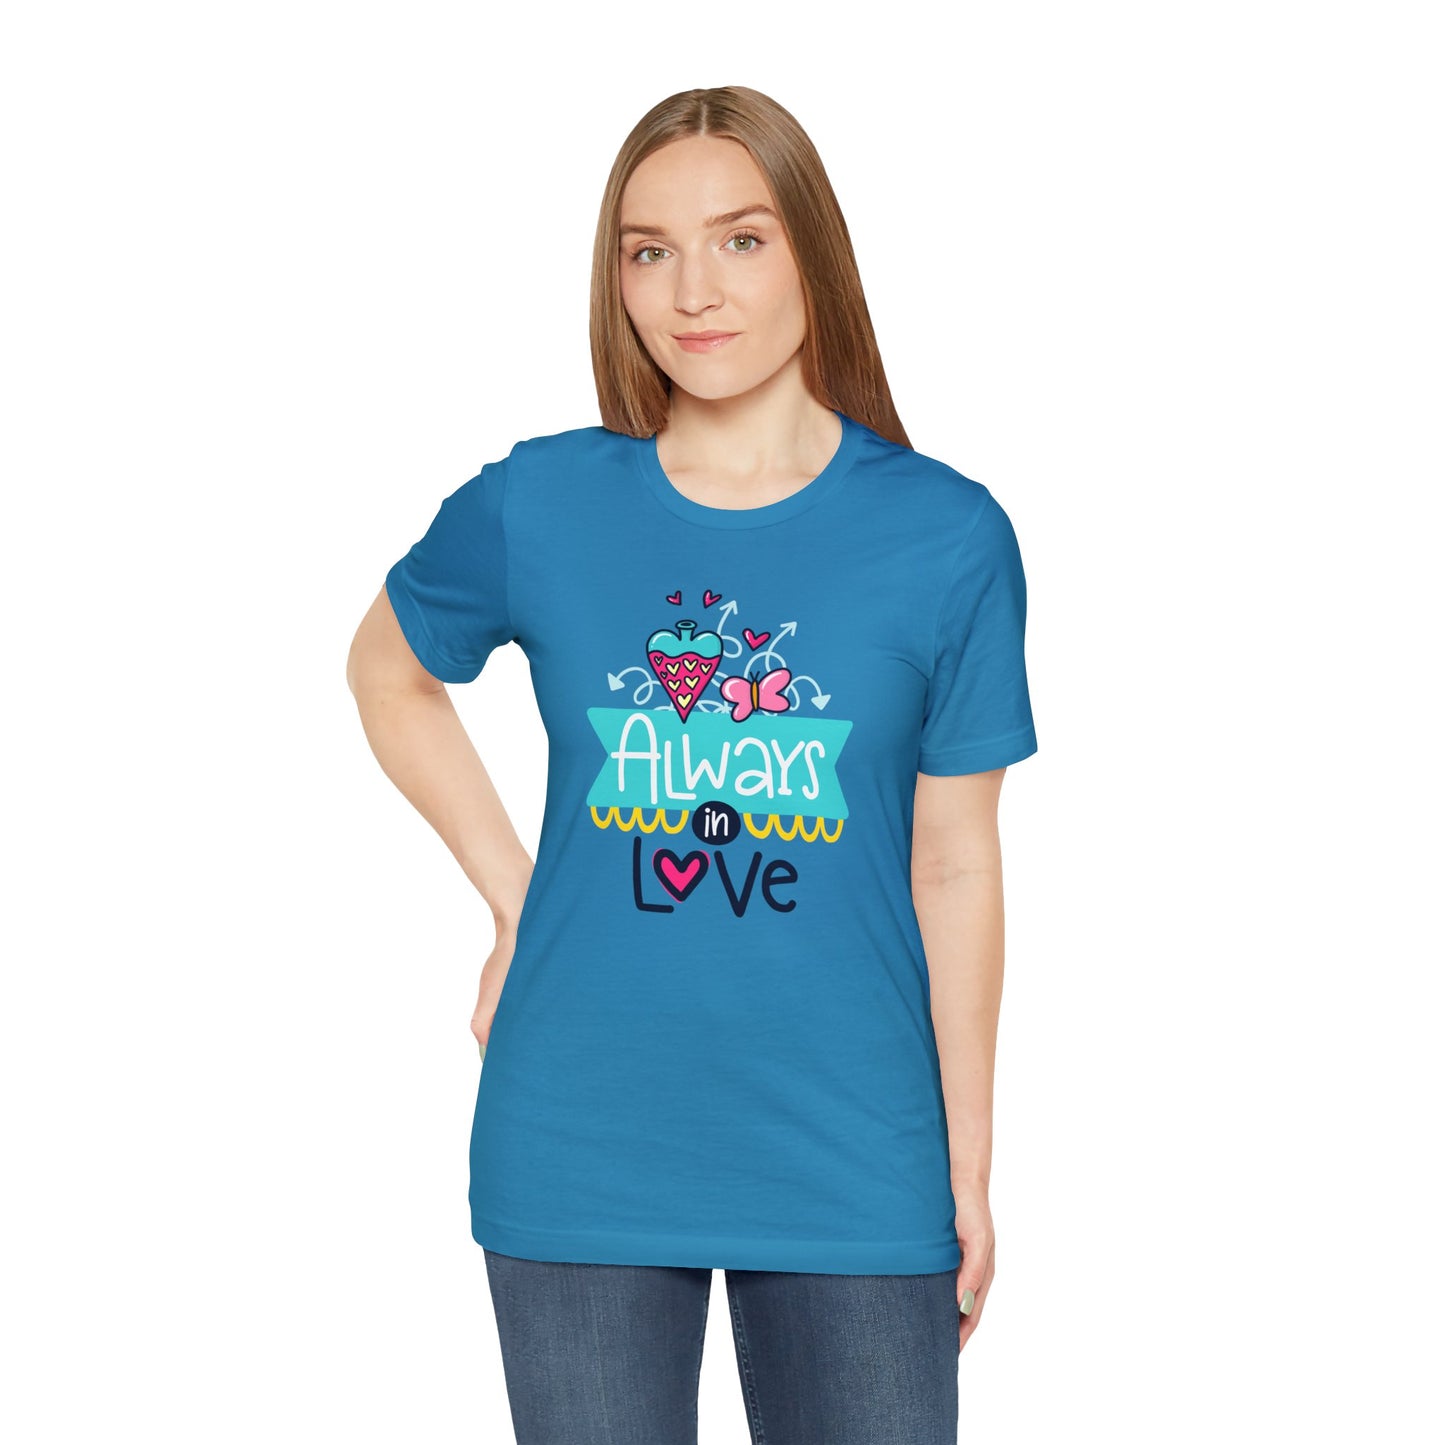 Always In Love: Express Your Passion with Our Stylish T-Shirts!